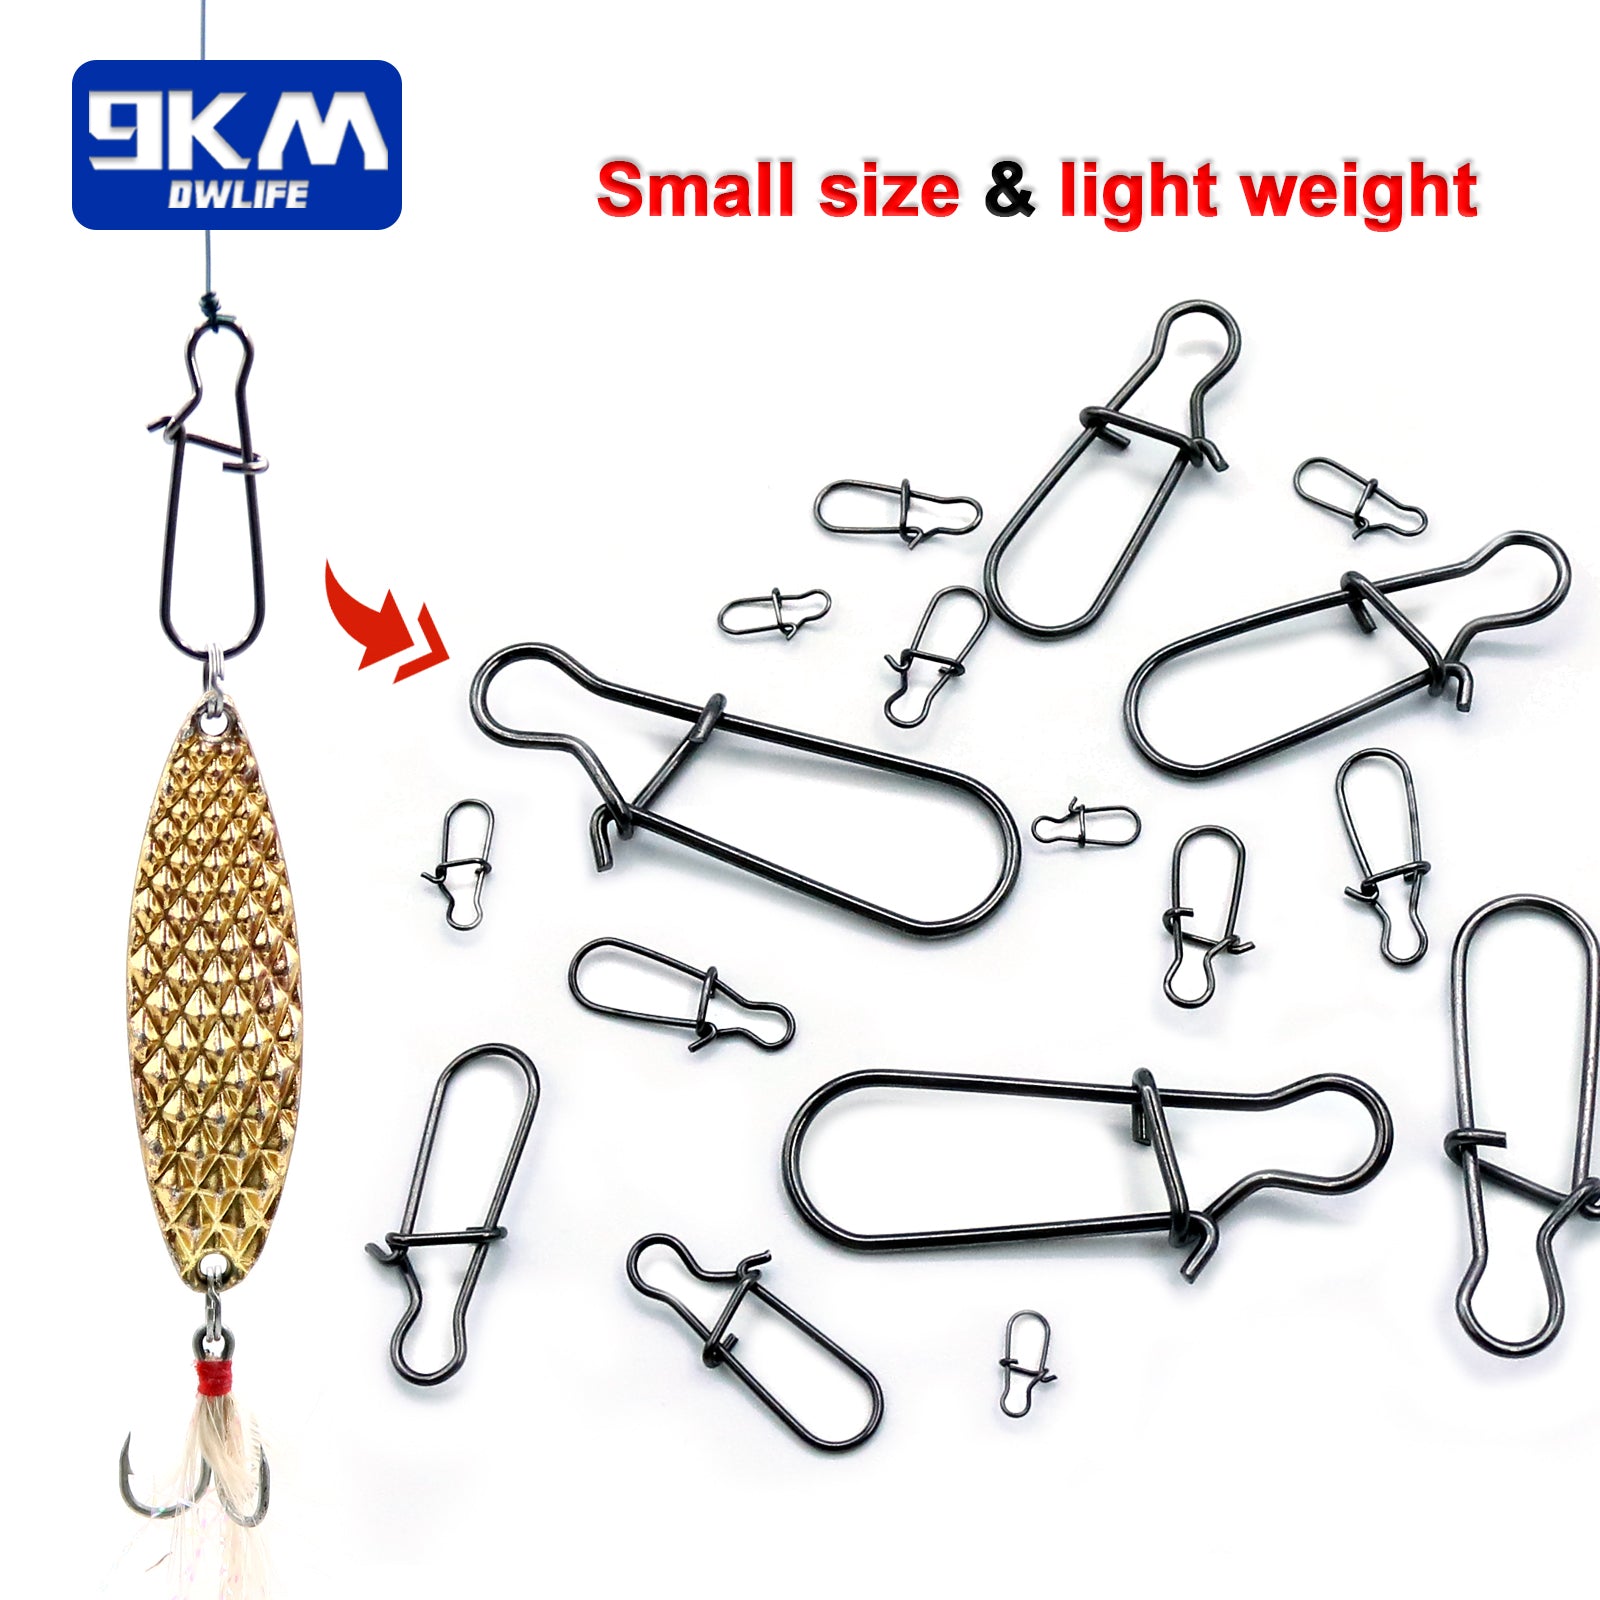 Fishing Accessories, Fishing Swivels with Coastlock Snap, High Strength  Stainless Steel Fast Change Lures for Fishing Line Leader Baits Hooks  Weights